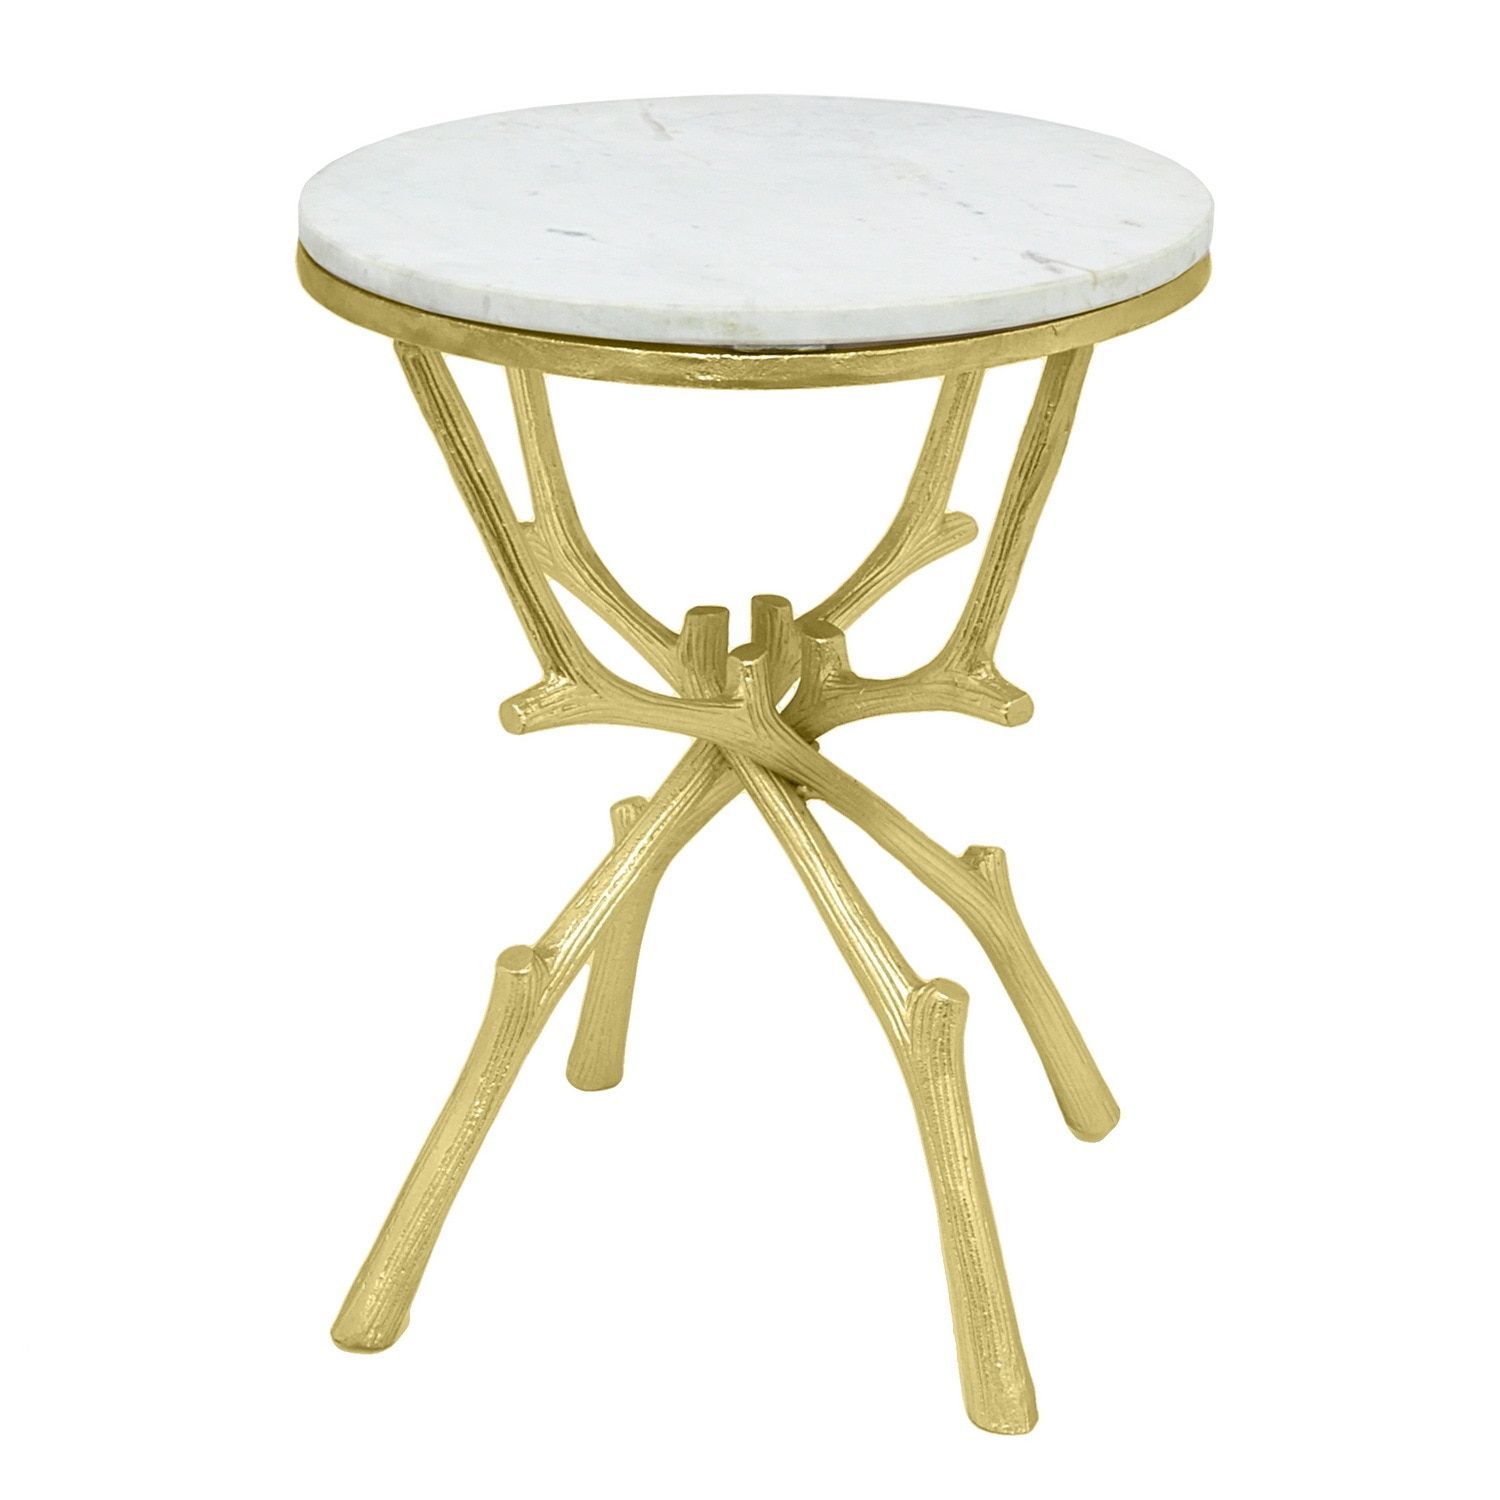 three hands marble top round accent table products york furniture wrought iron outdoor tables hampton bay covers pottery barn glass dining ethan allen country french coffee